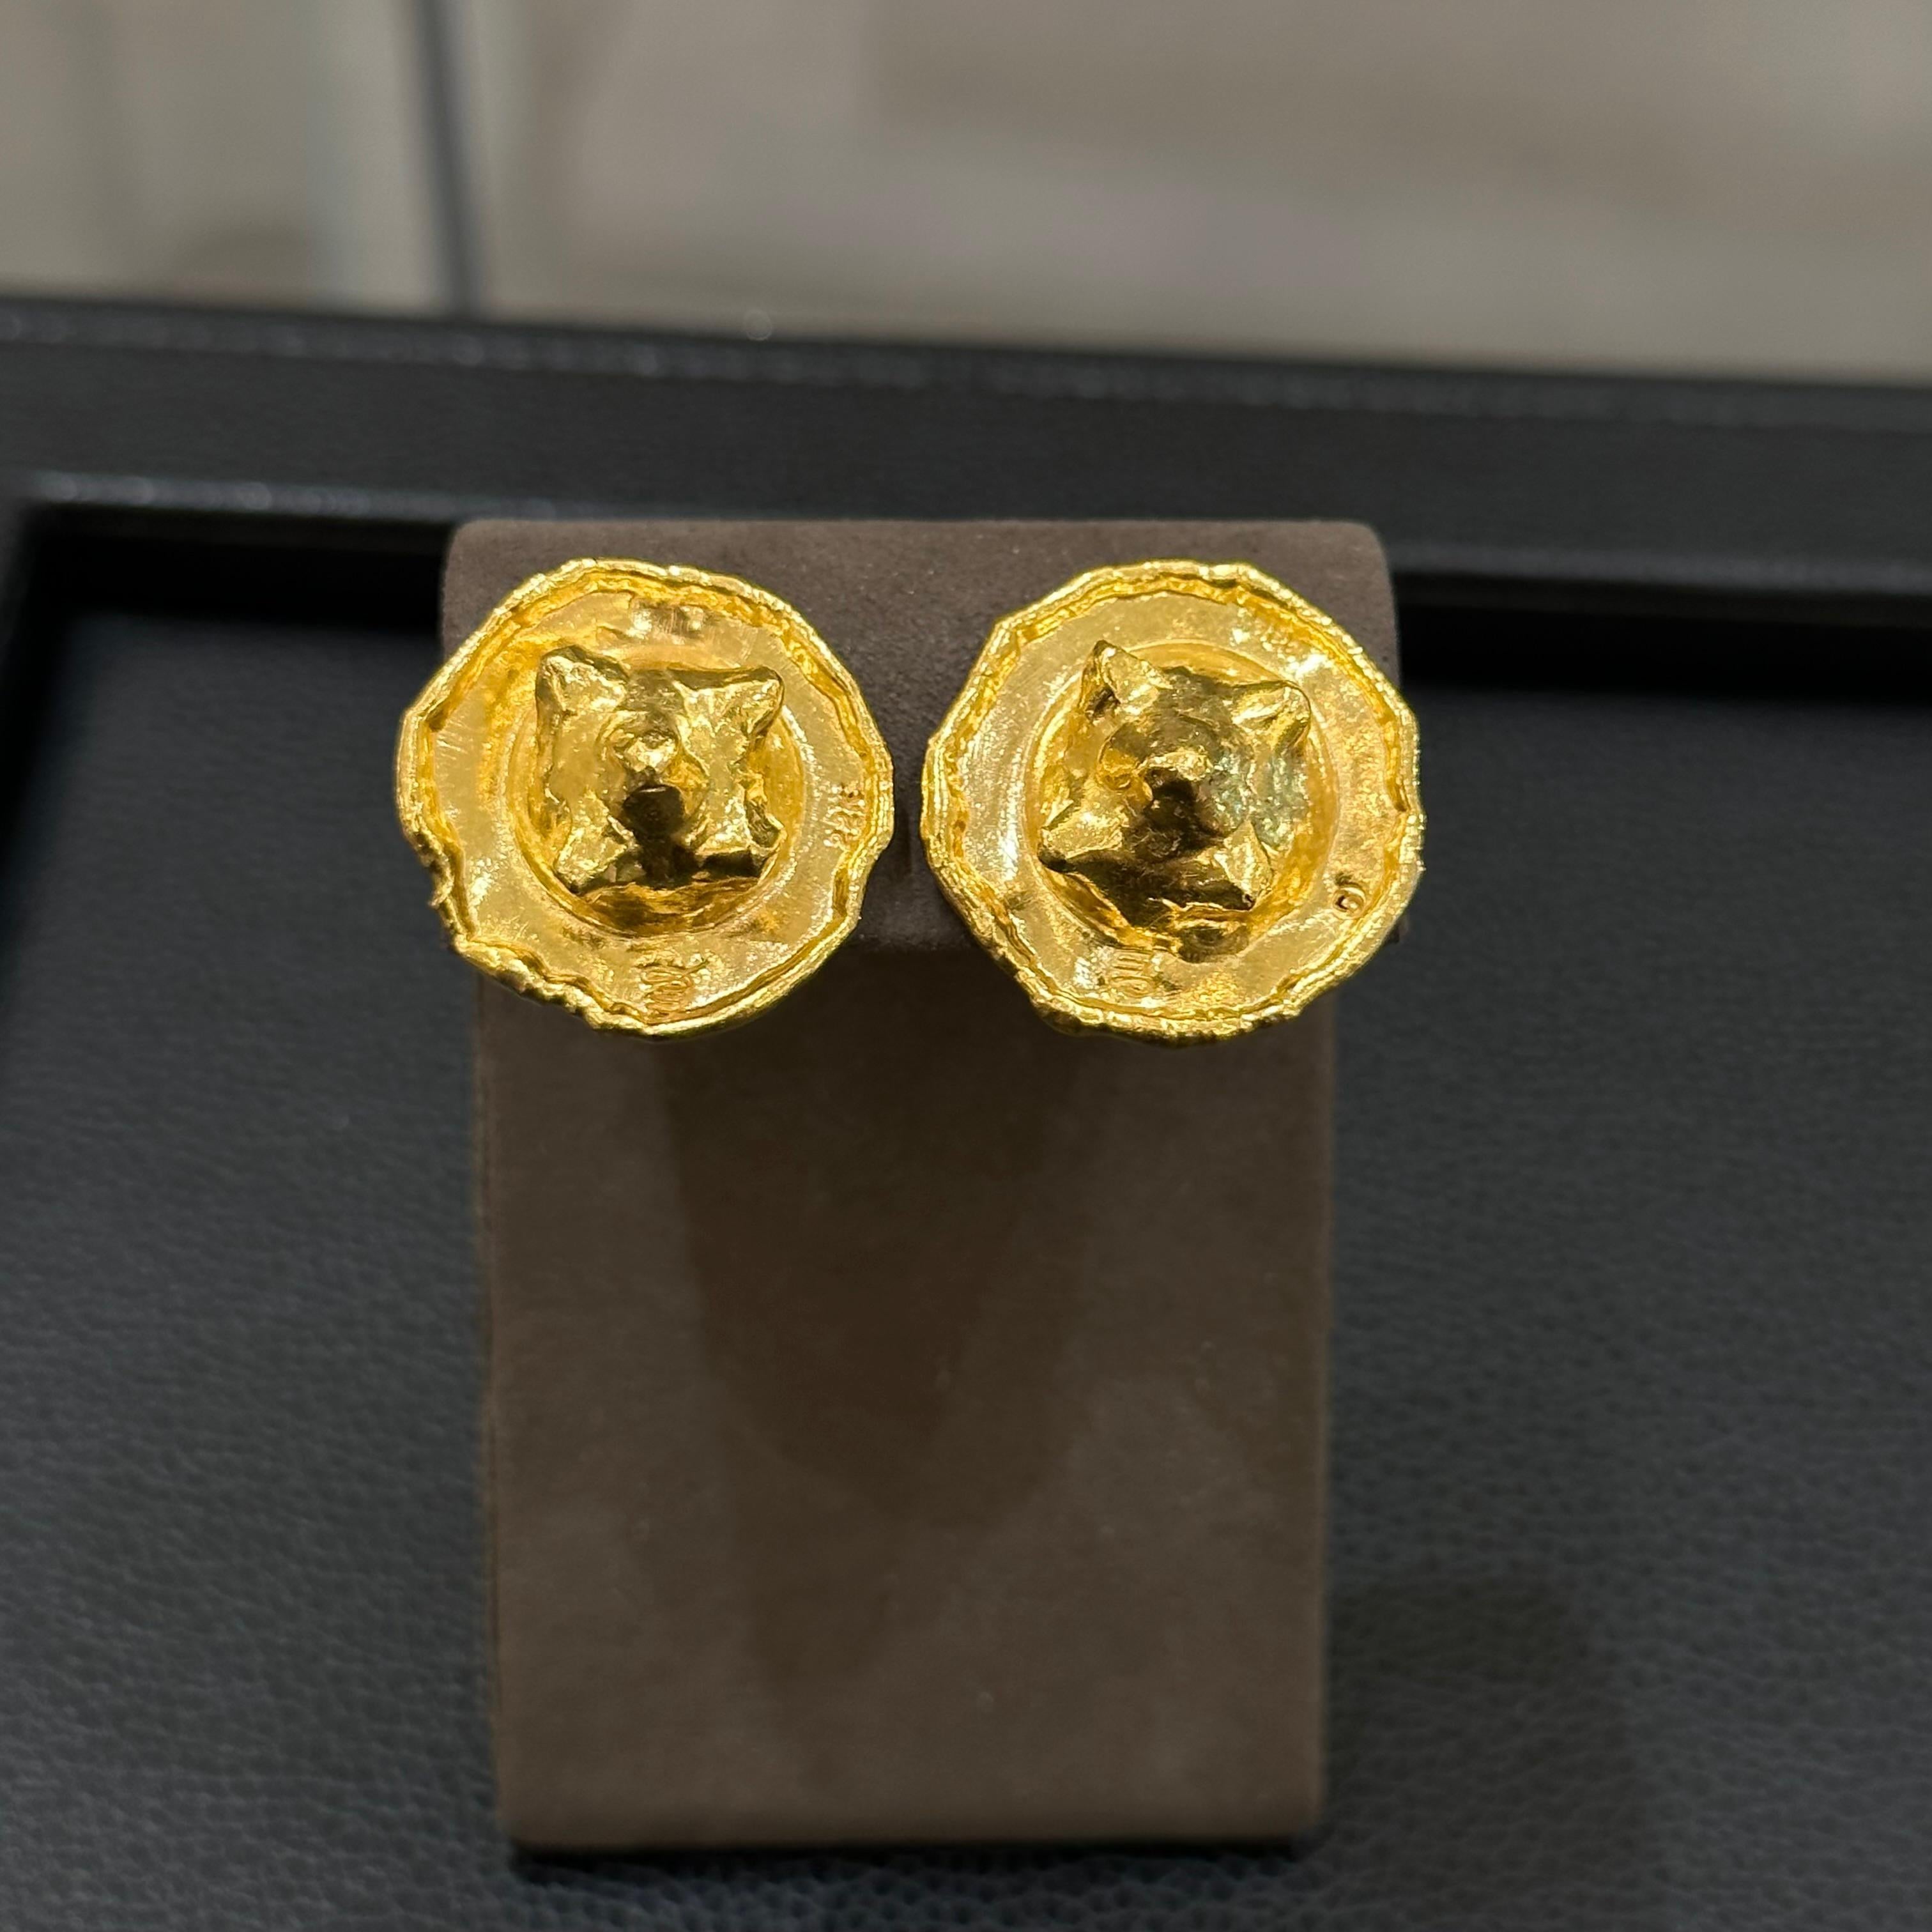 22K Jean Mahie Earrings. Round Profile with Domed Nodule Center. 18.10 Grams of 22K Gold.